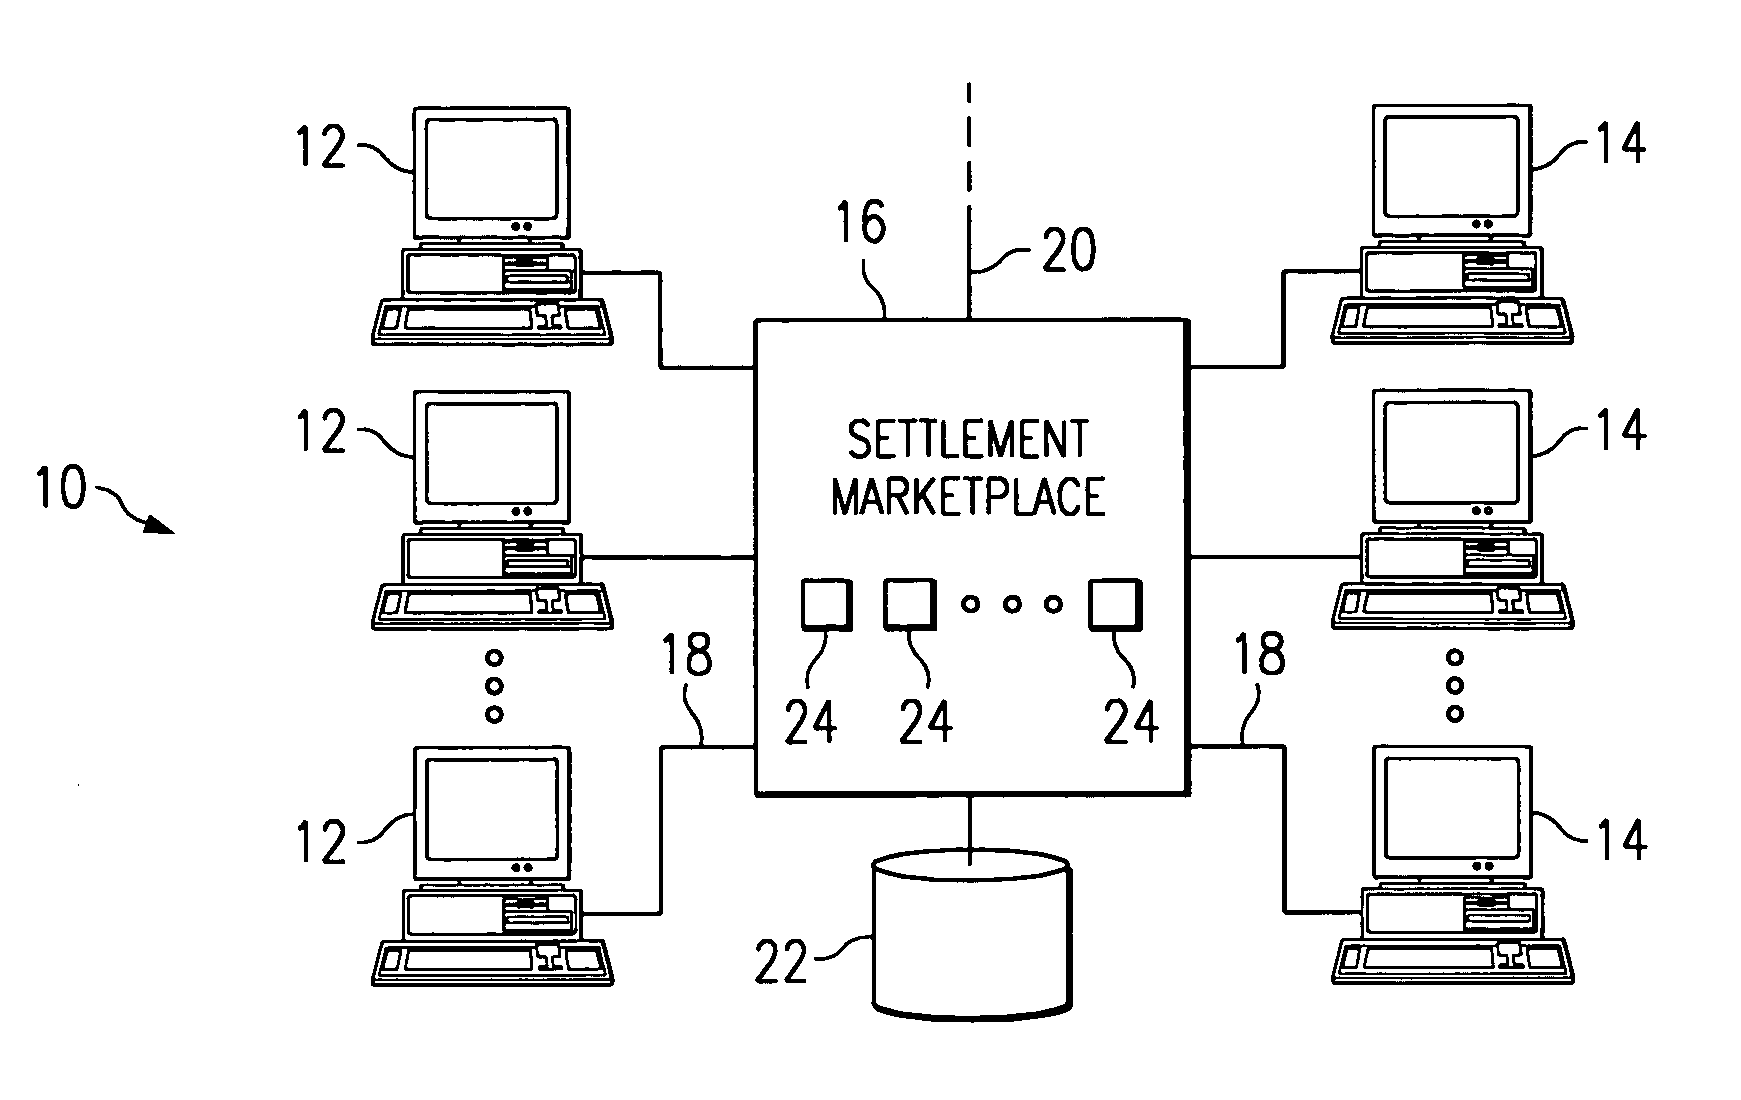 System and method for providing electronic financial transaction services